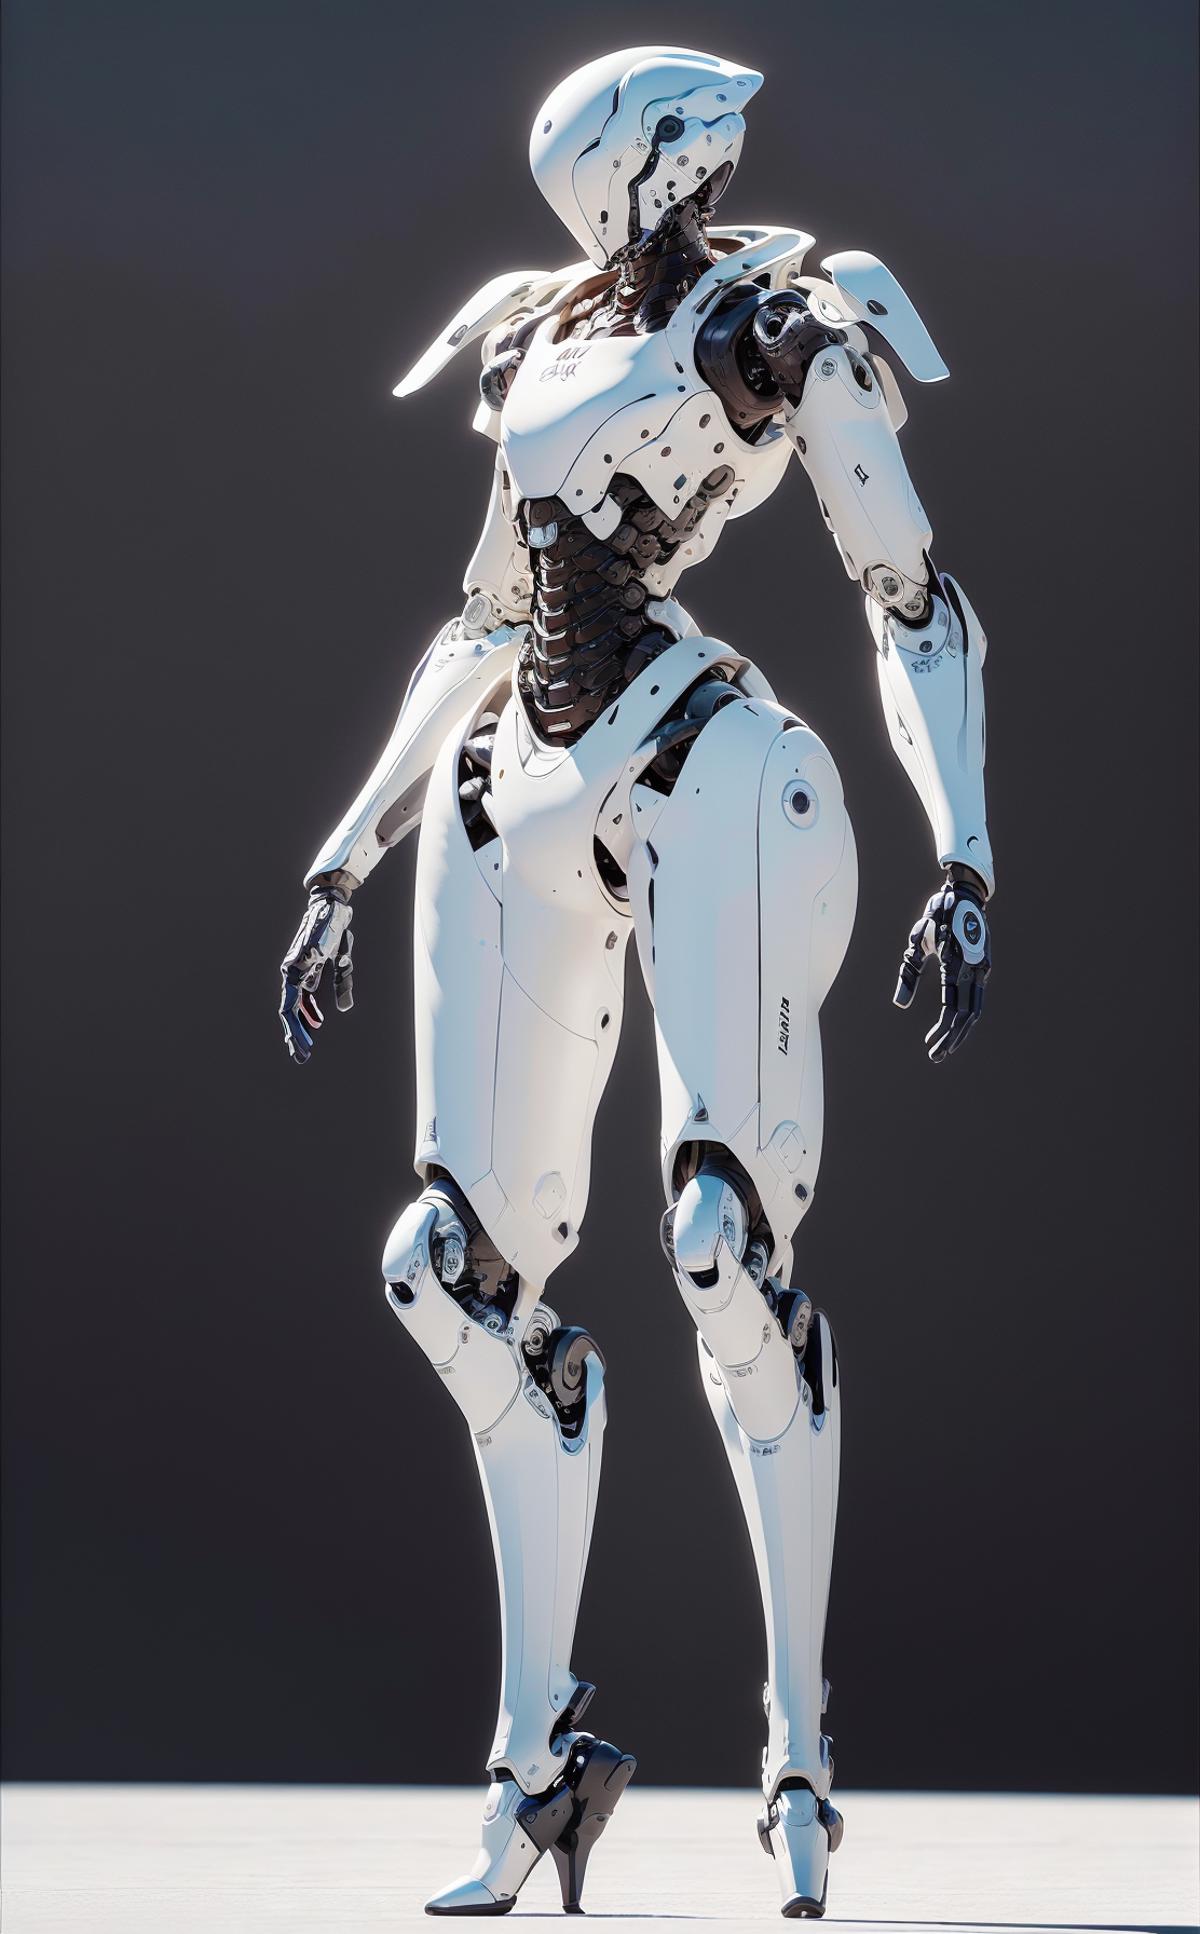 AI model image by PAC_songbai